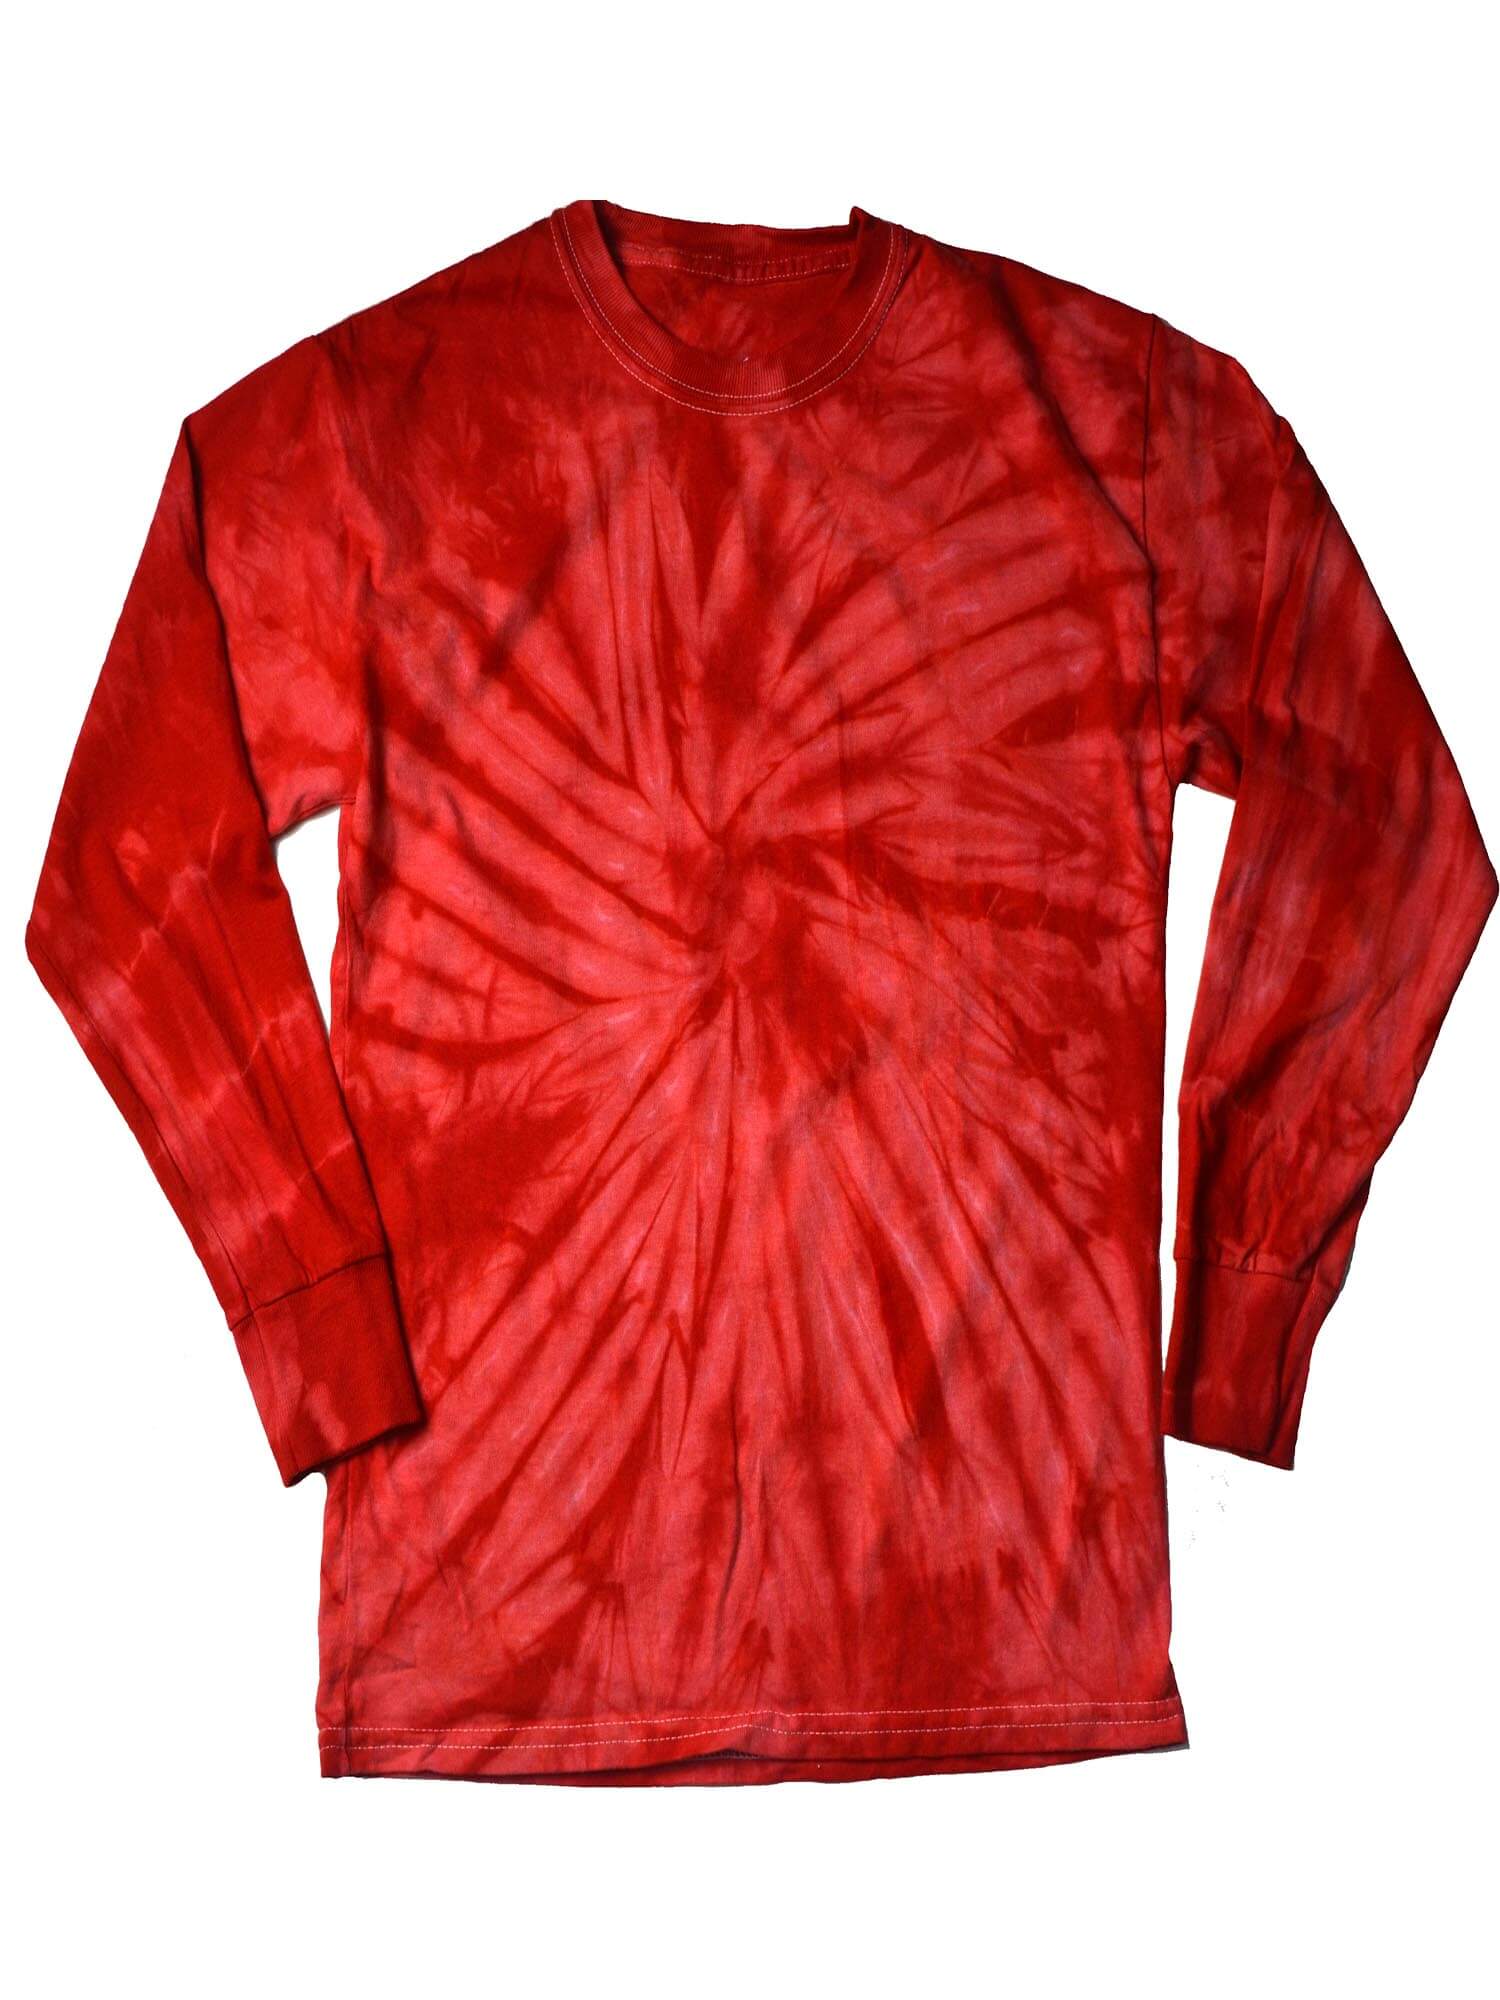 Red Tie-Dye Long Sleeve Shirts Adult | Zandy's Bargains